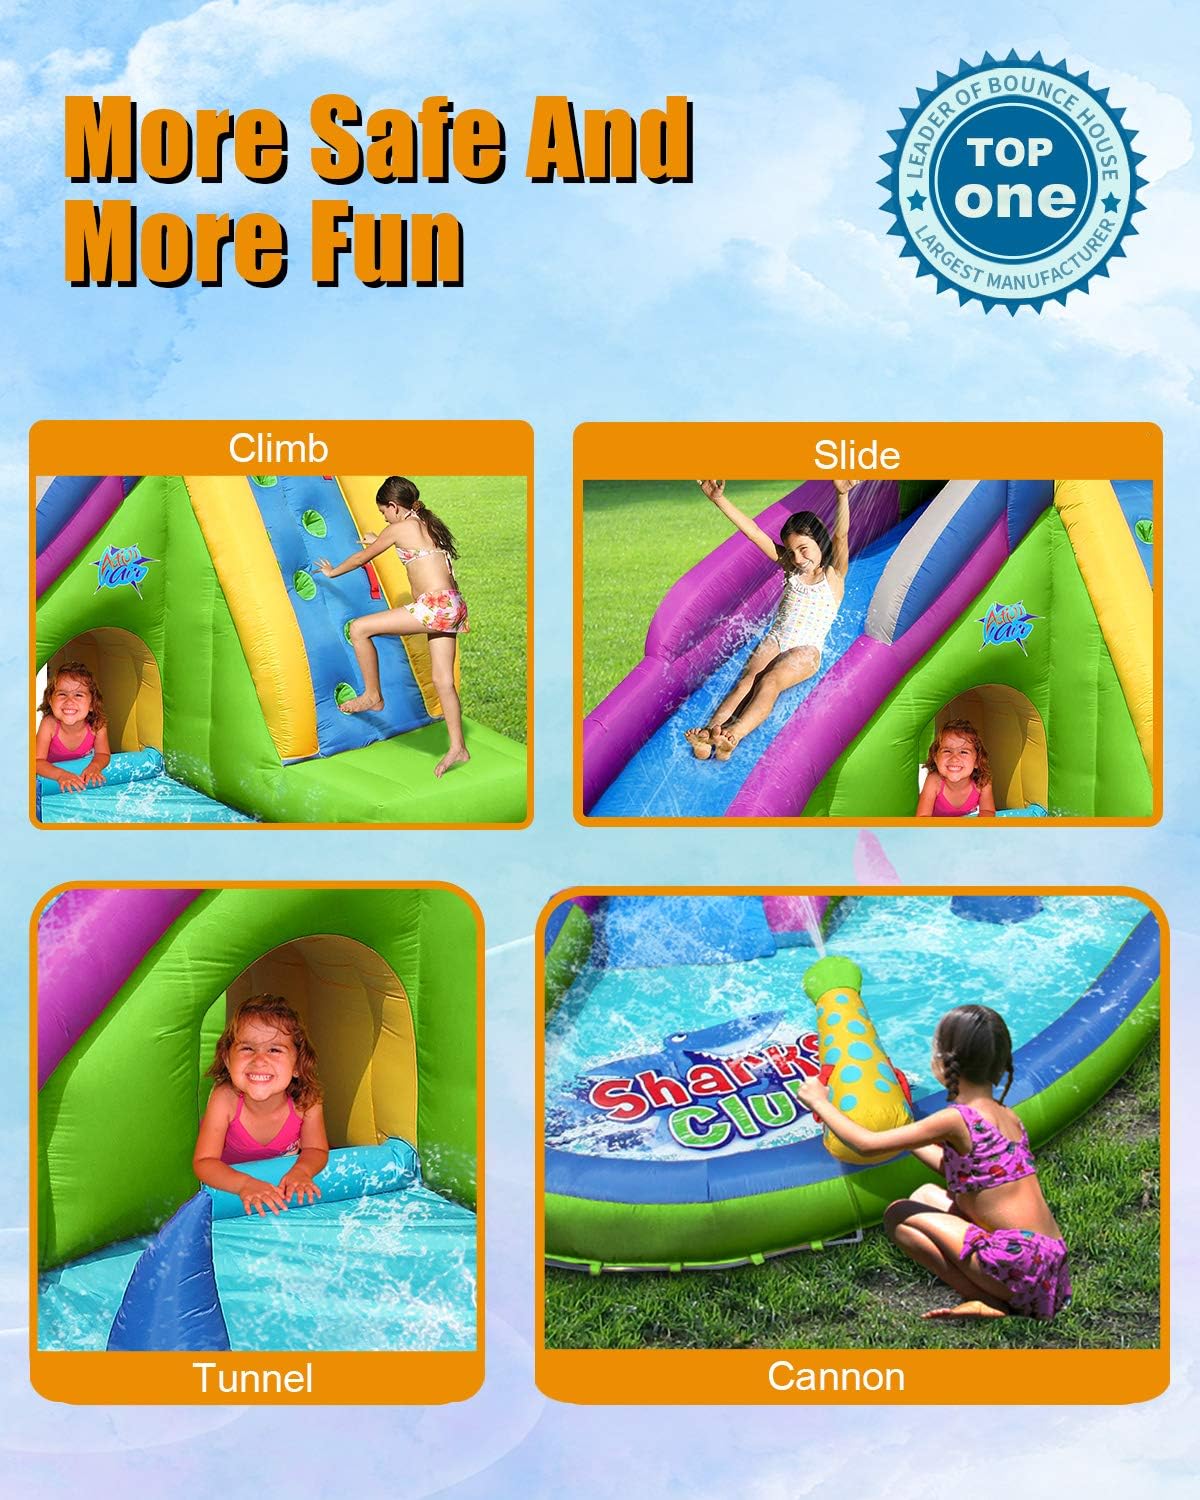 ACTION AIR Inflatable Water Slide, Shark Bounce House with Slide for Wet and Dry, Playground Sets for Kids Backyard, Water Spray & Water Pool, Durable Sewn with Extra Thick Material